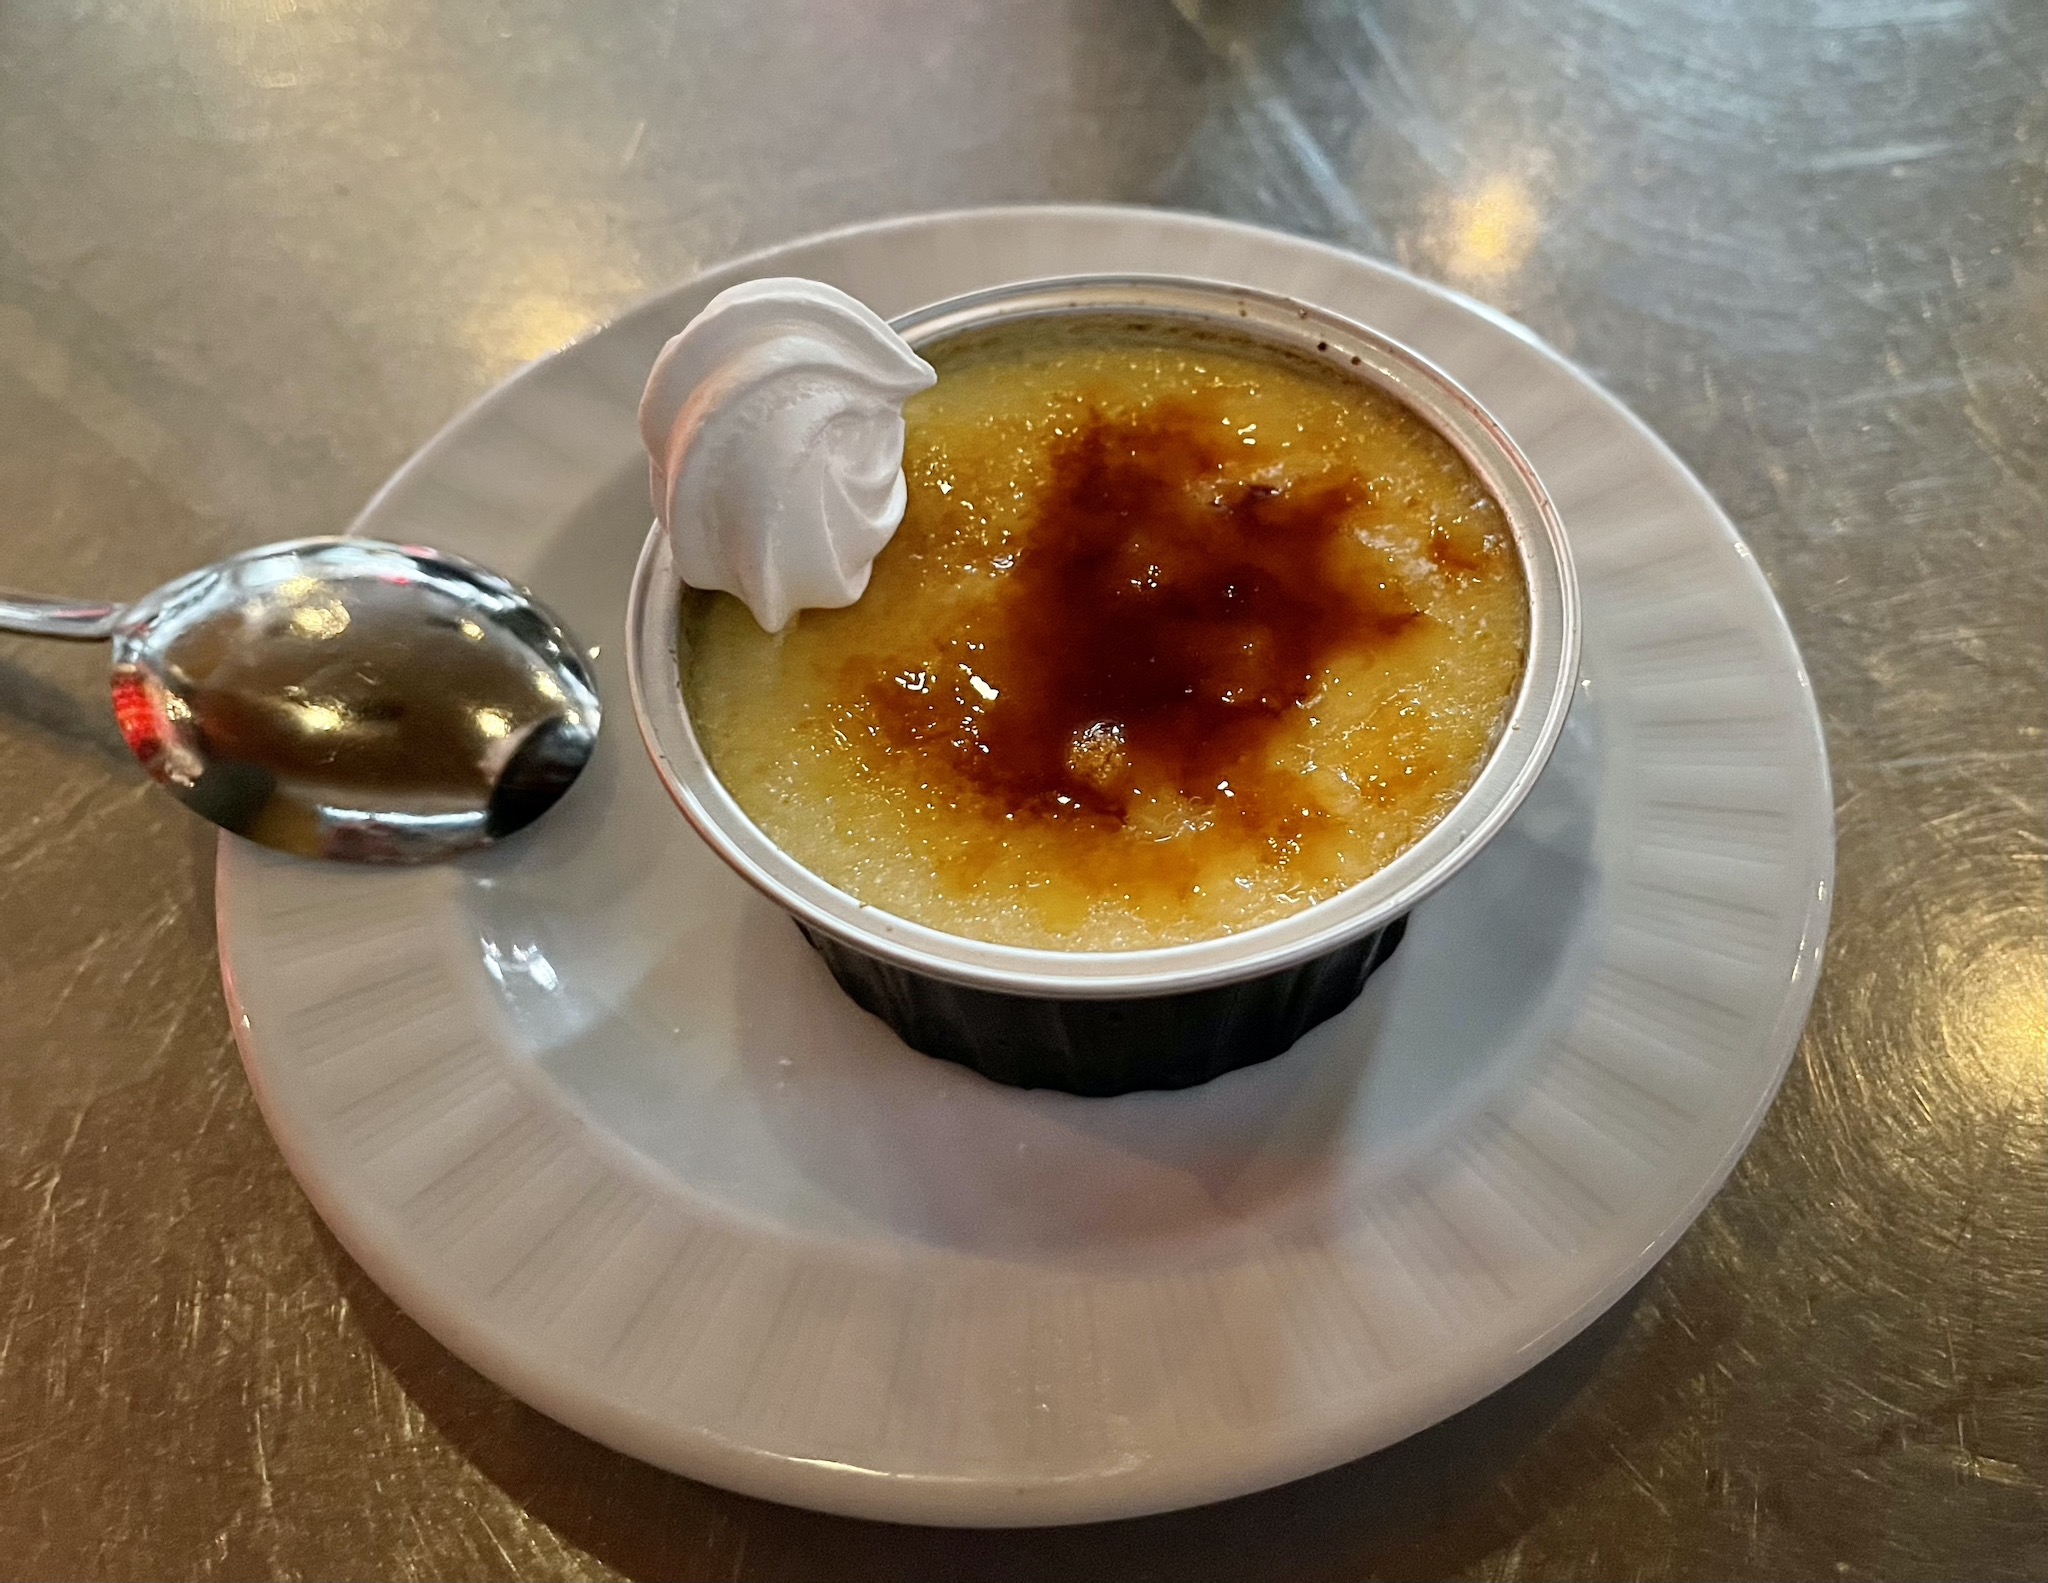 Renzo's Creme Brulee - soft custard with a sugar burn top, offered in traditional style or infused with dulce de leche caramel